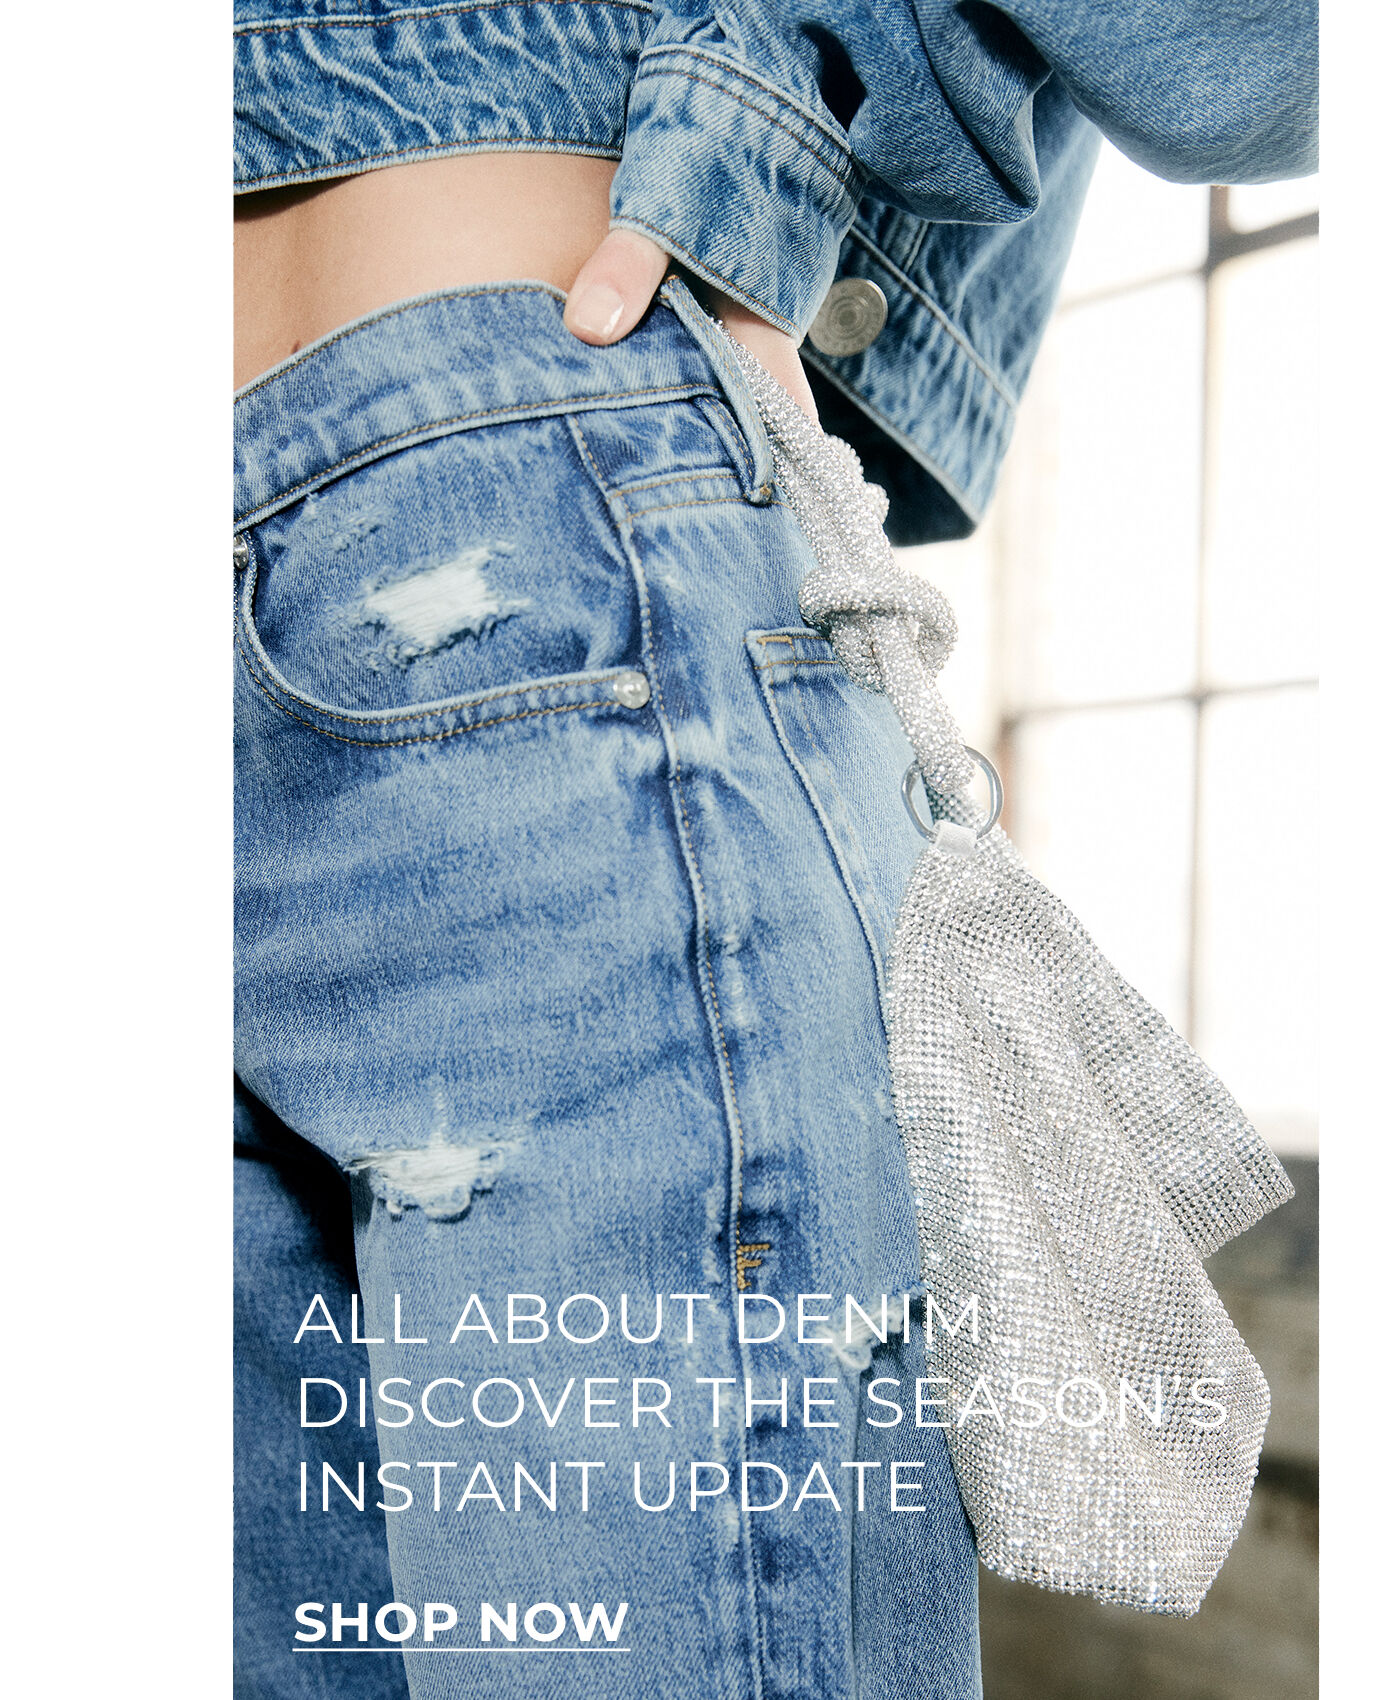 ALL ABOUT DENIM: DISCOVER THE SEASON'S INSTANT UPDATE